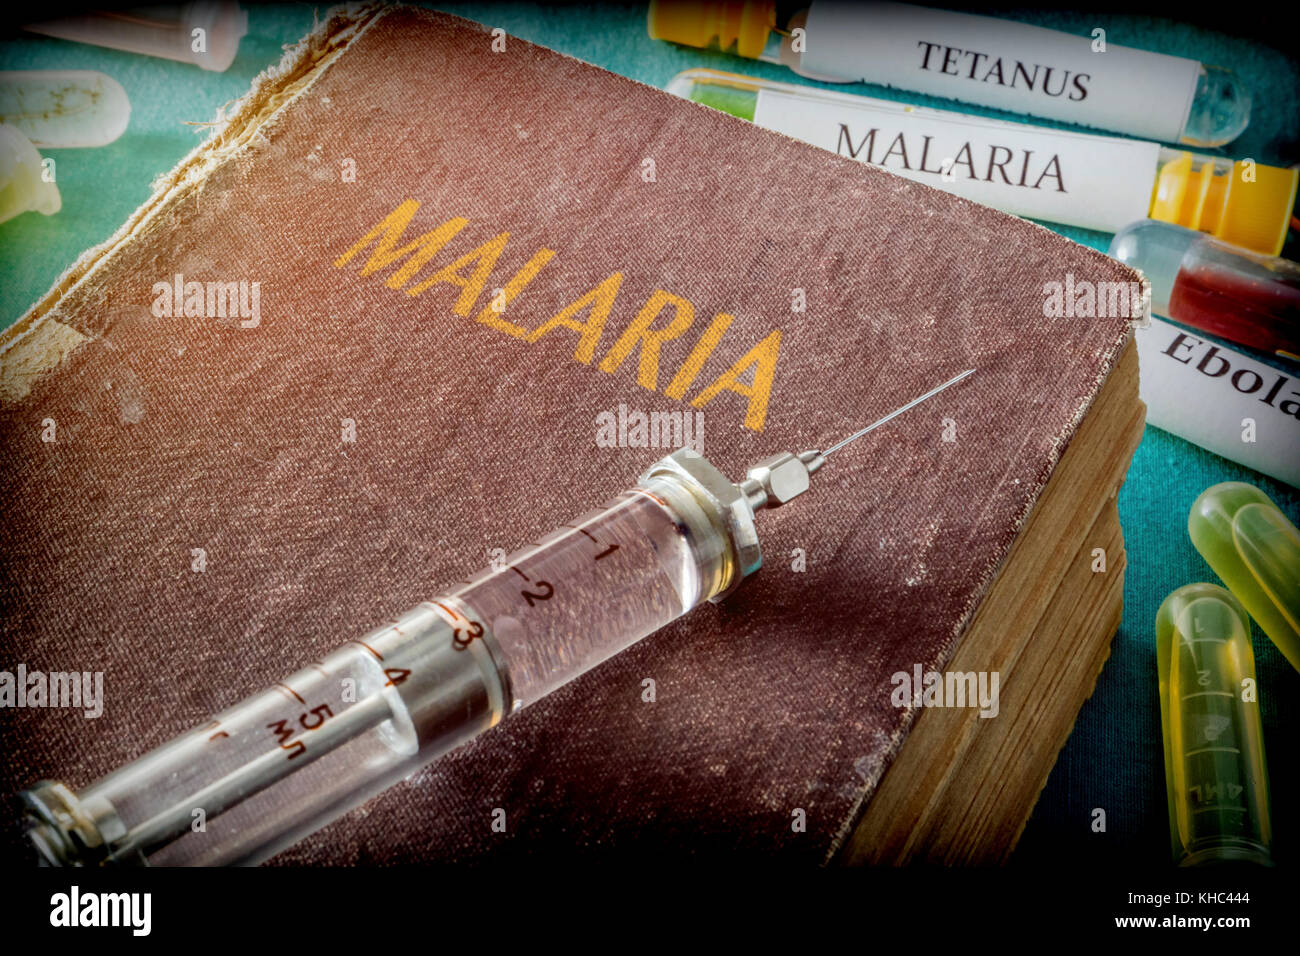 Vintage Syringe on a book of malaria, medical concept Stock Photo